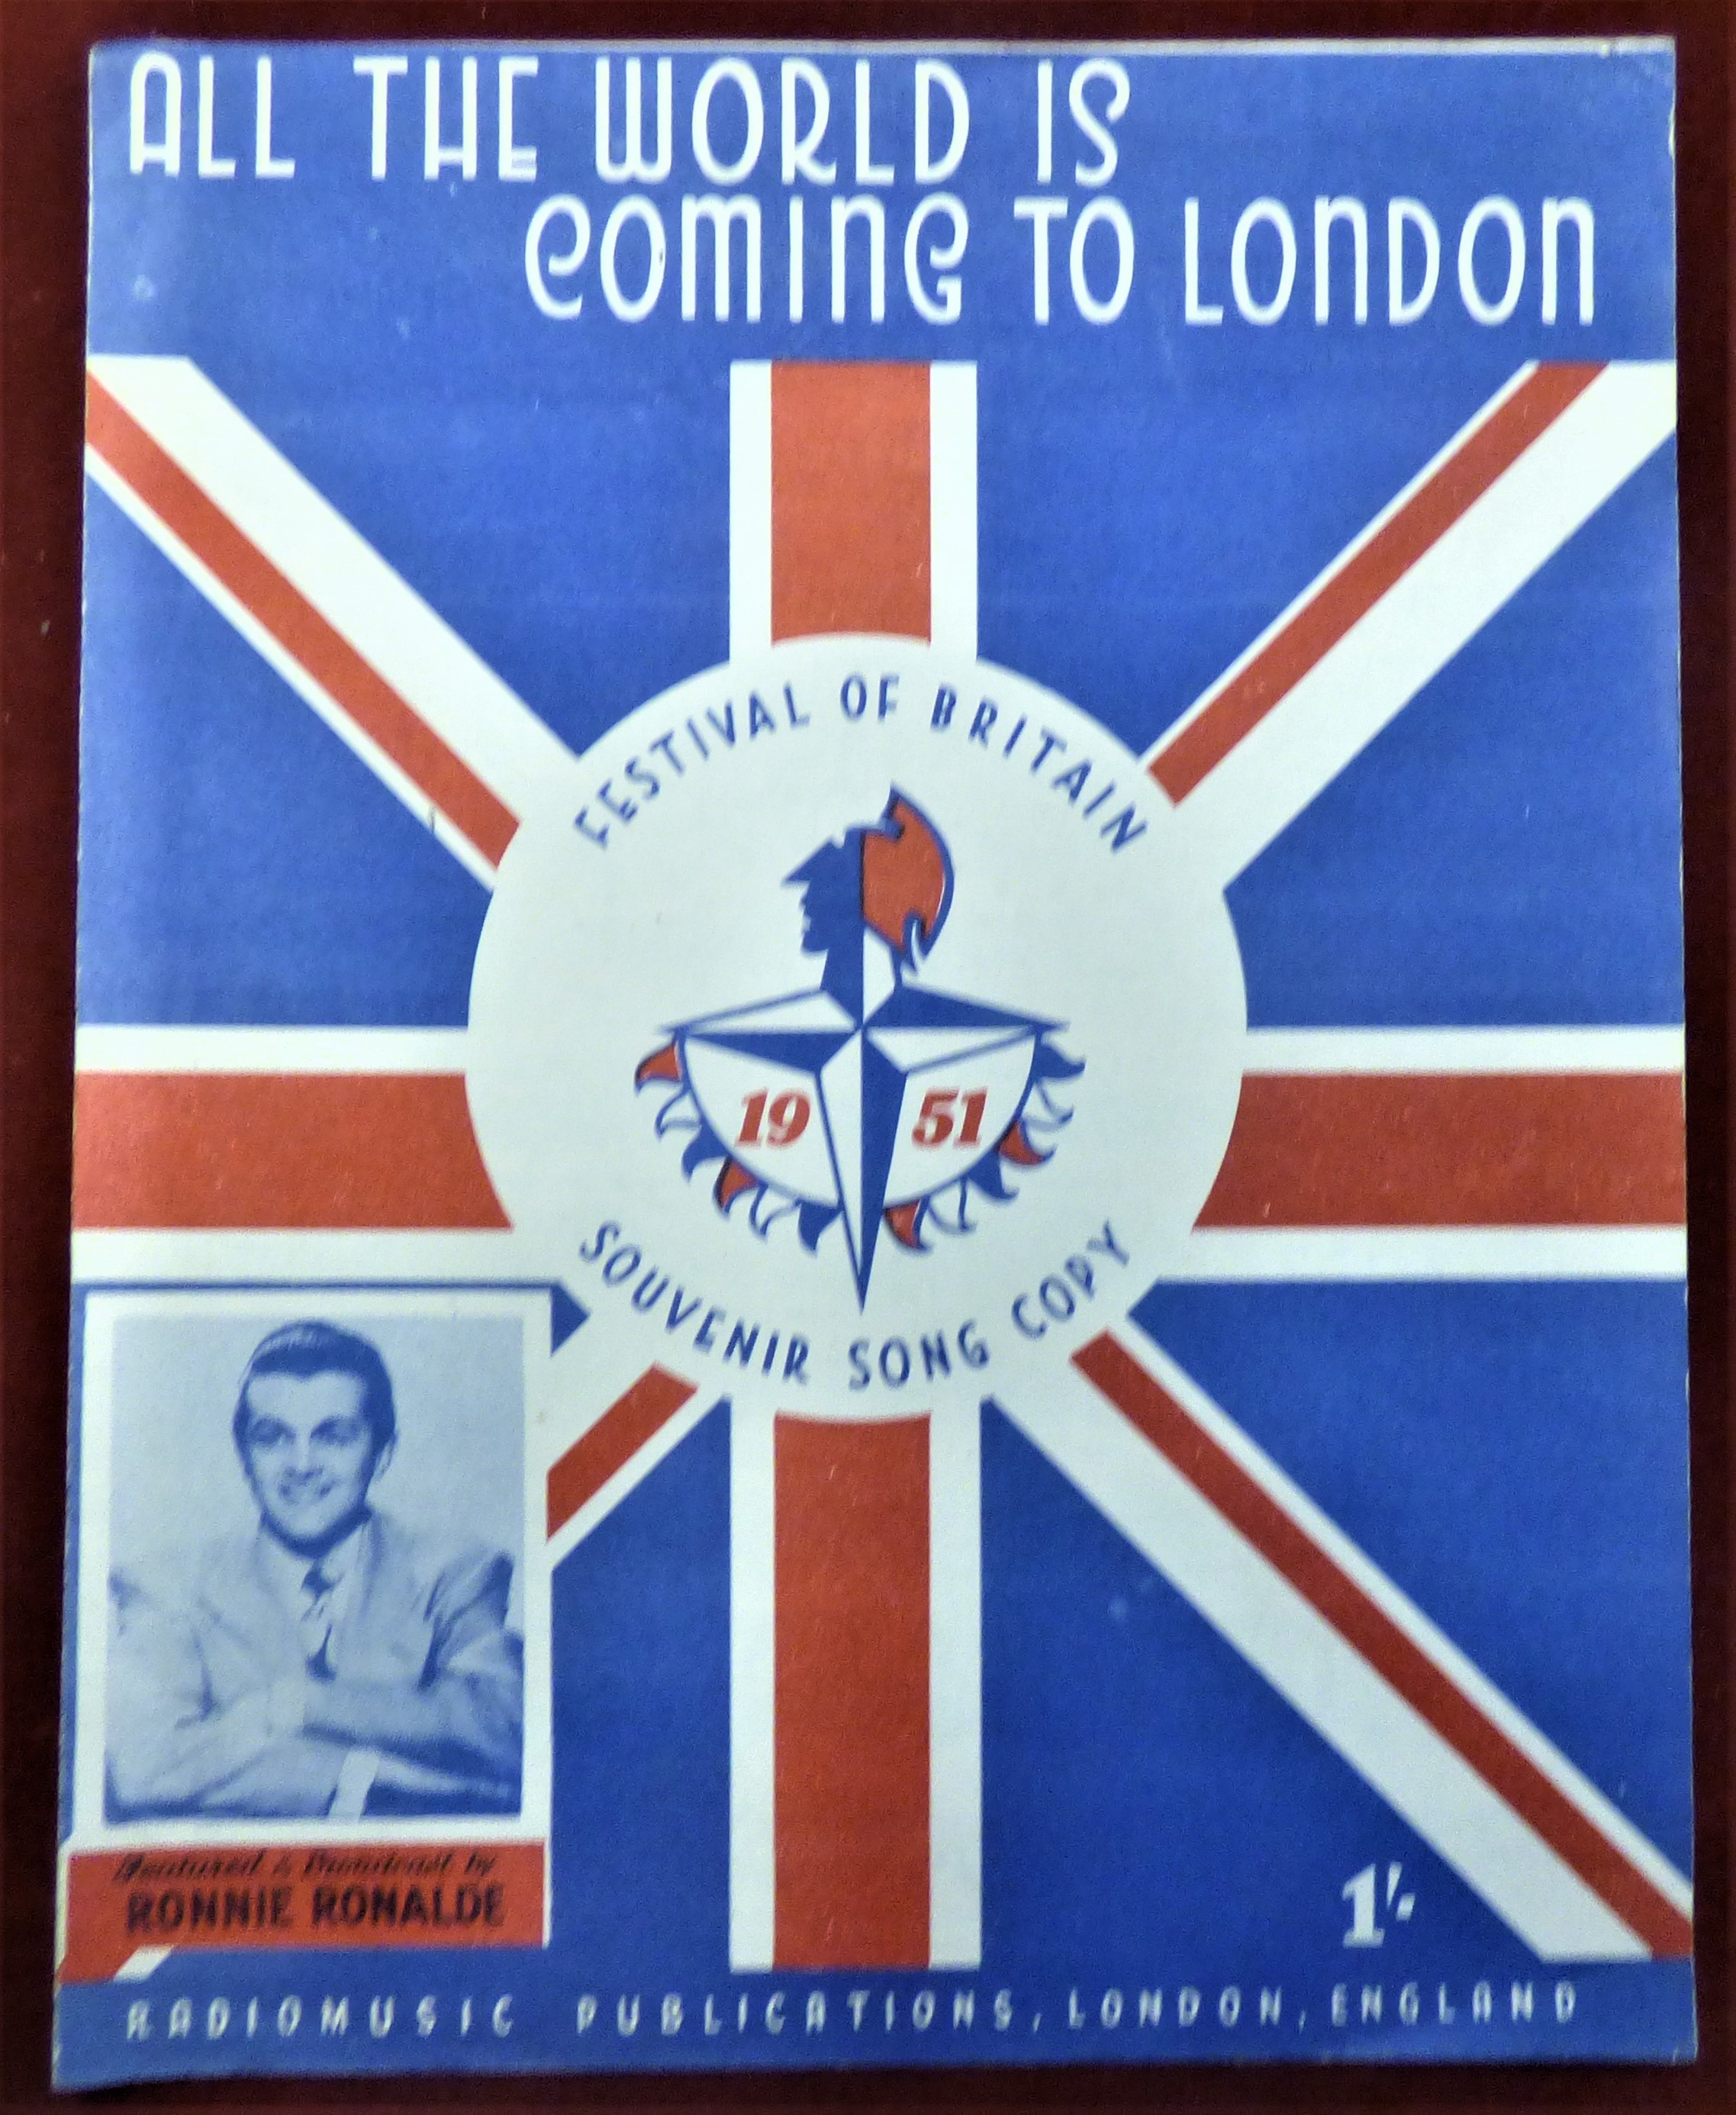 1951 Festival of Britain - All the world is coming to London Souvenir Song Copy, published